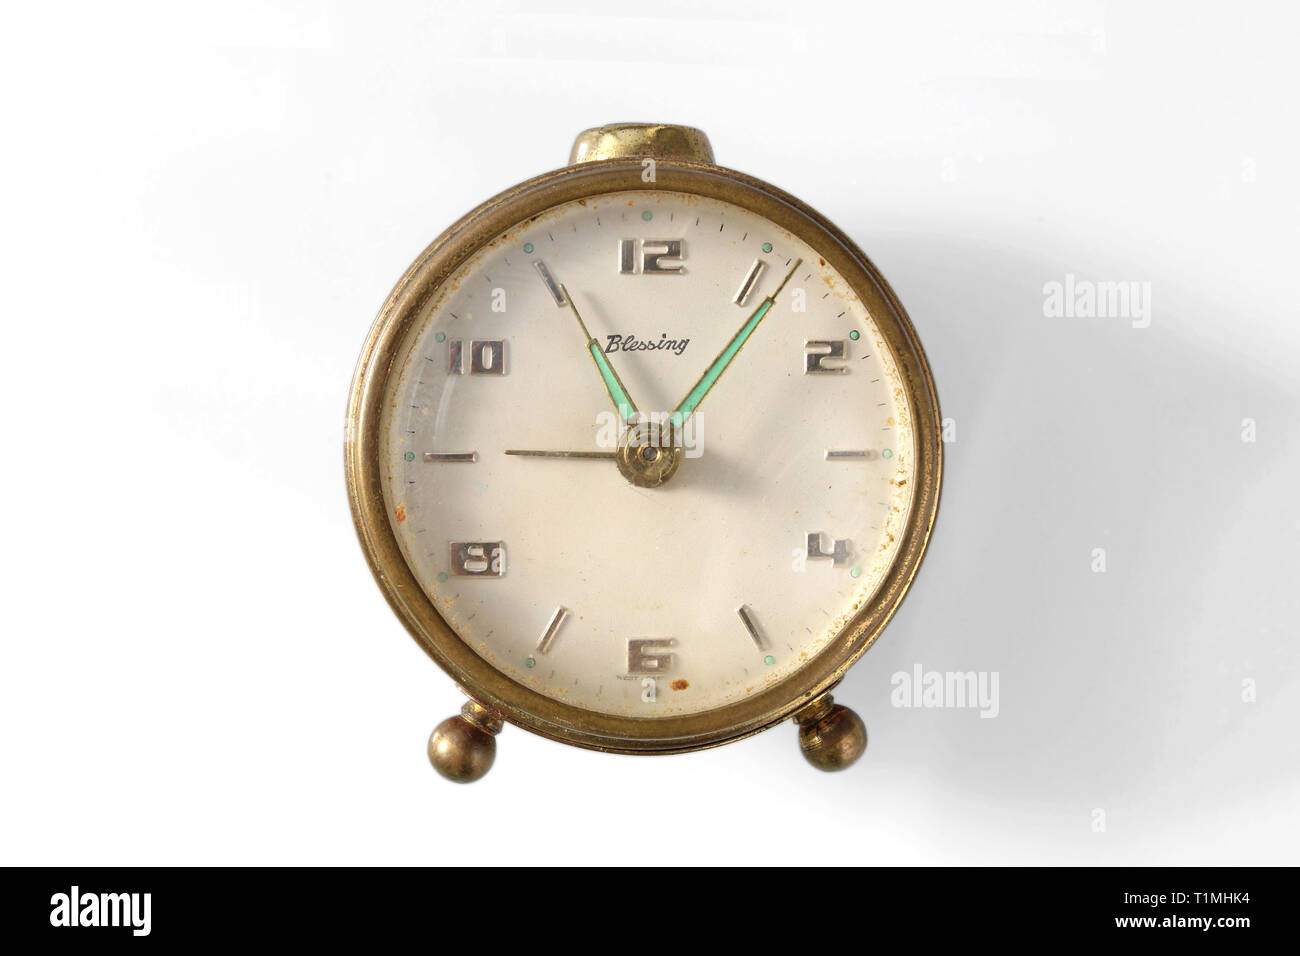 Vintage alarm clock, Blessing made in Germany, isolated on white  background, close-up Stock Photo - Alamy